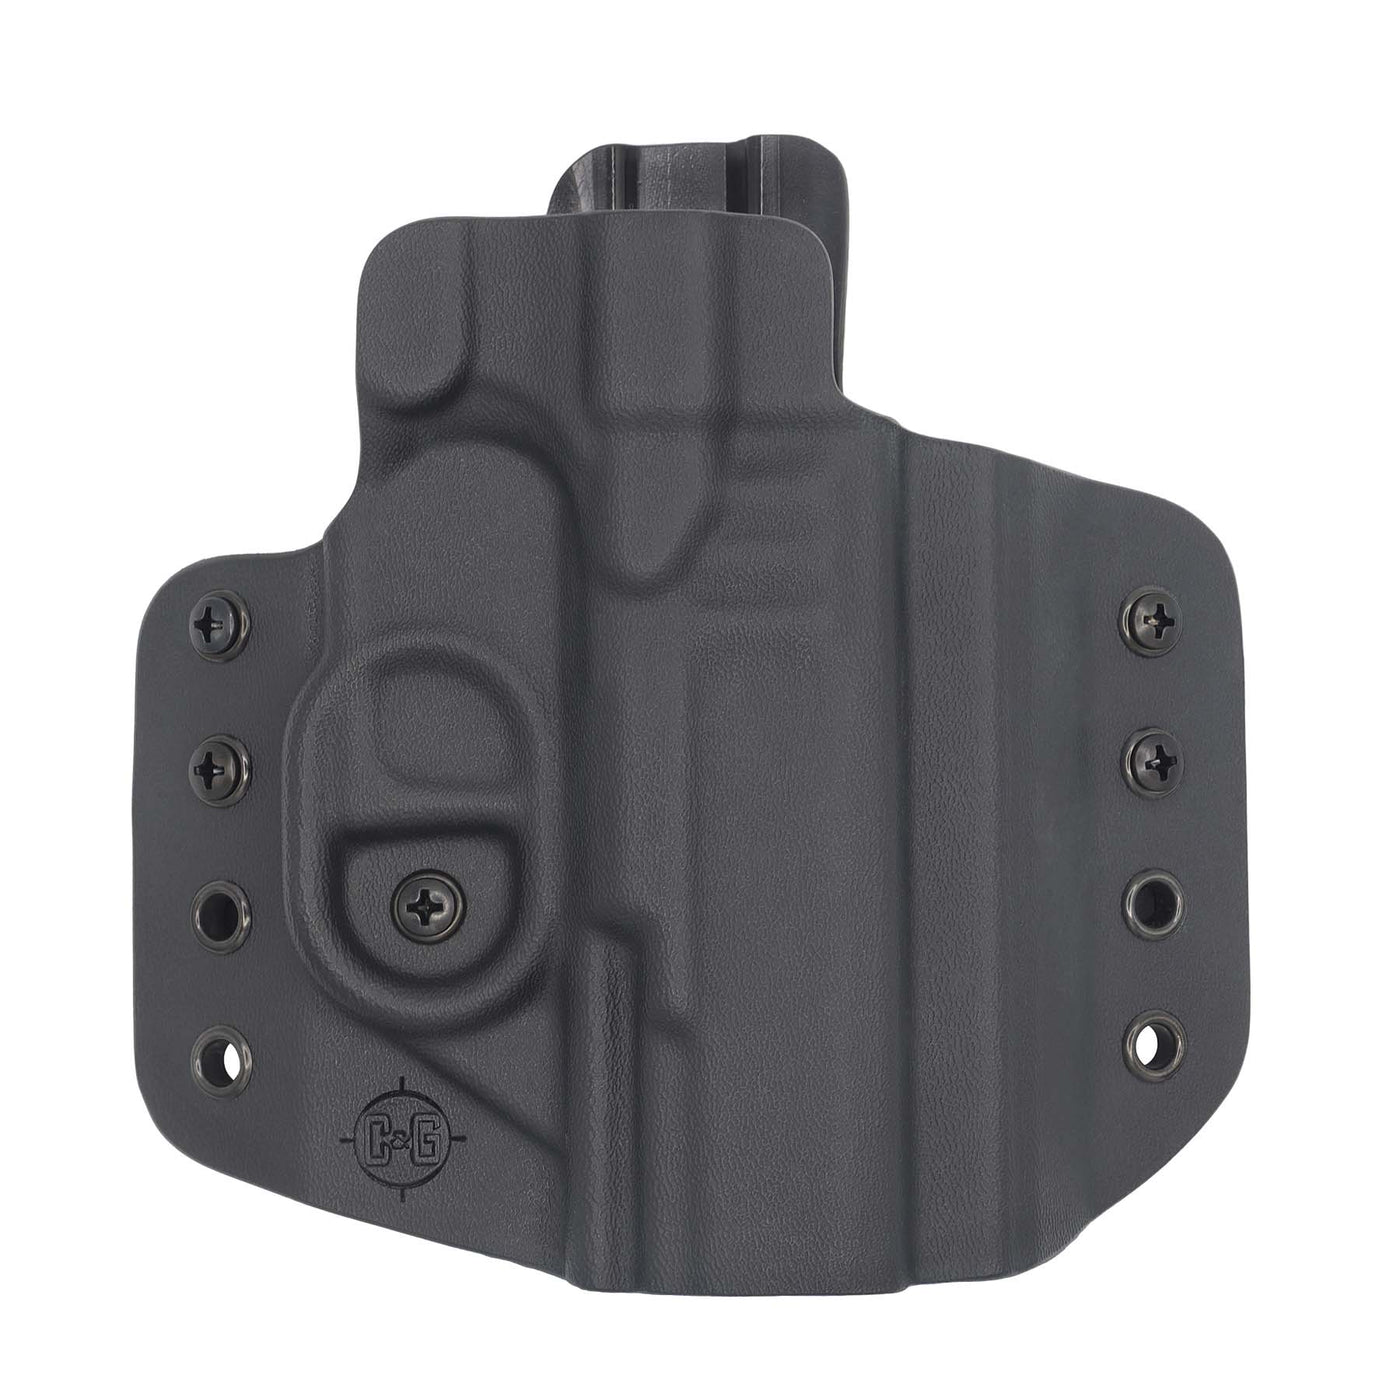 Walther PDP 4 inch OWB holster by C&G Holsters